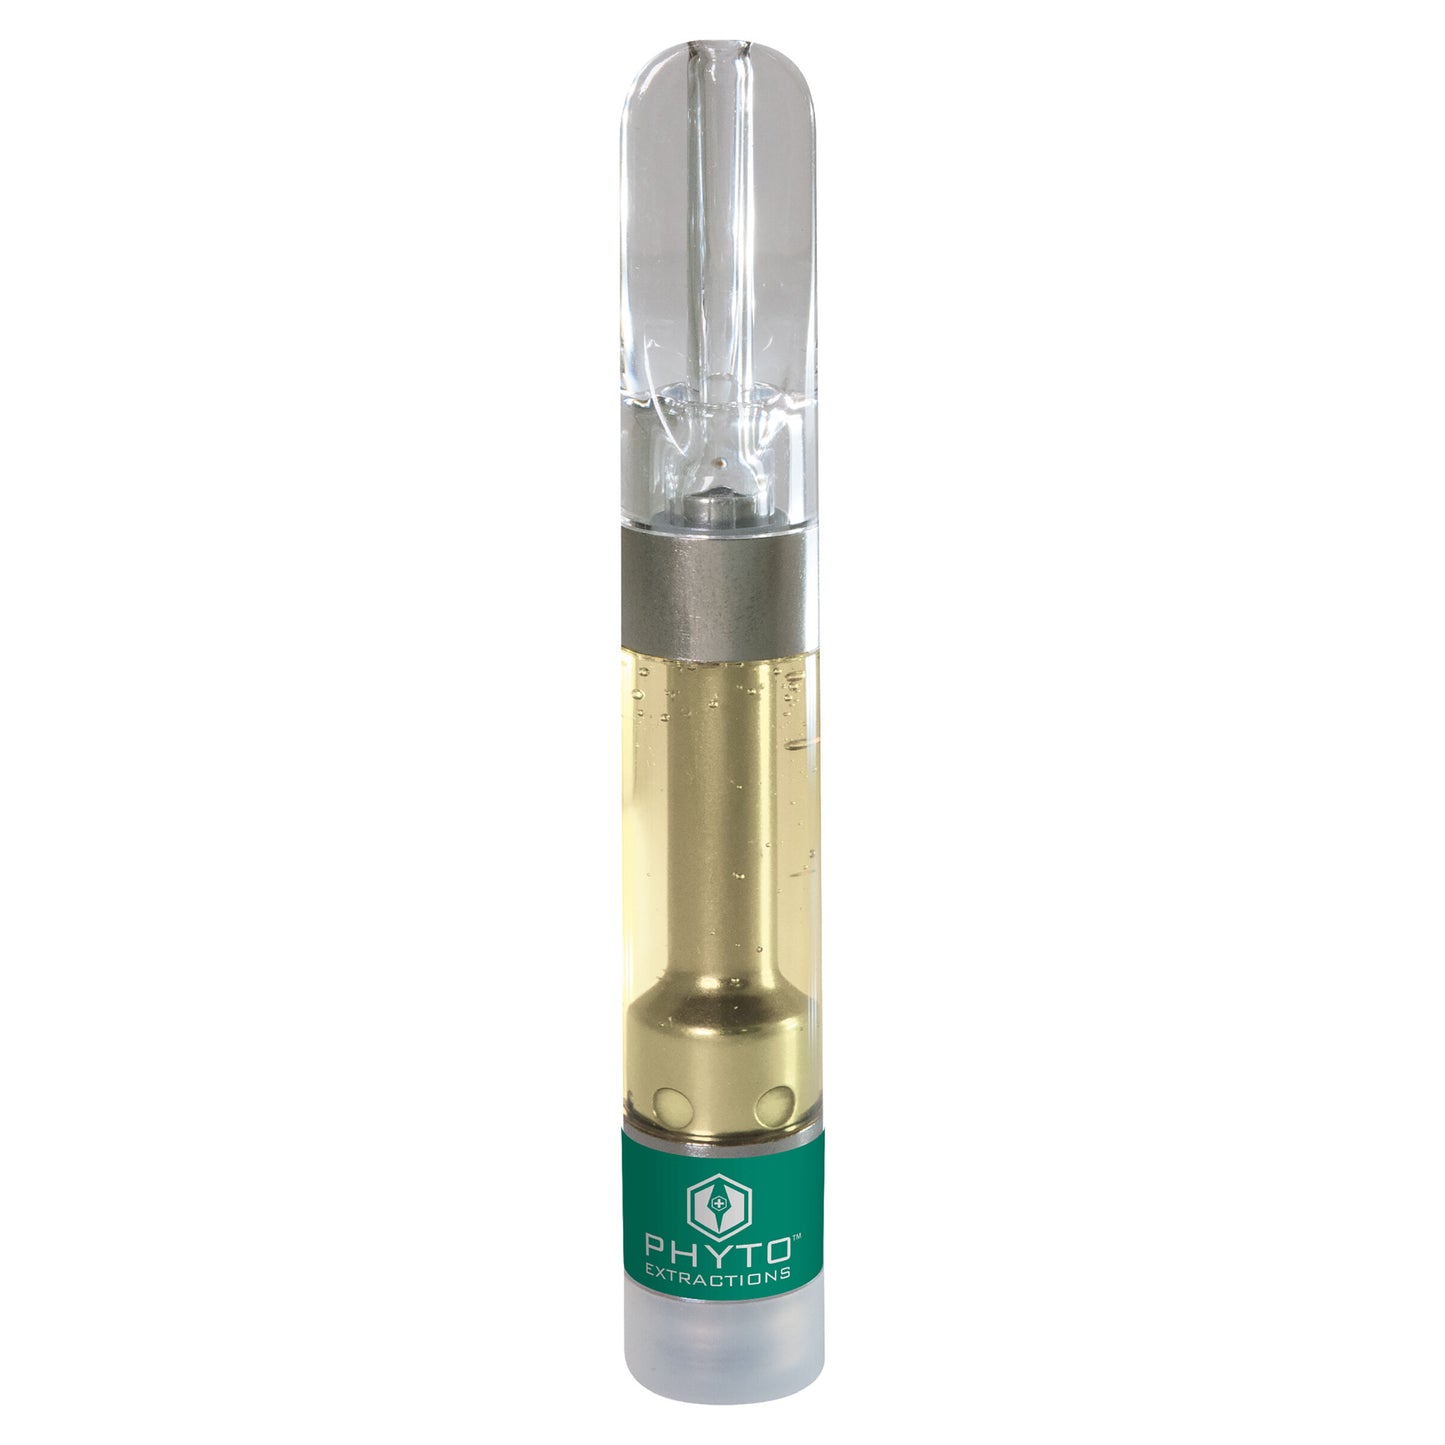 Phyto Extractions - Blueberry 510 Thread Cartridge